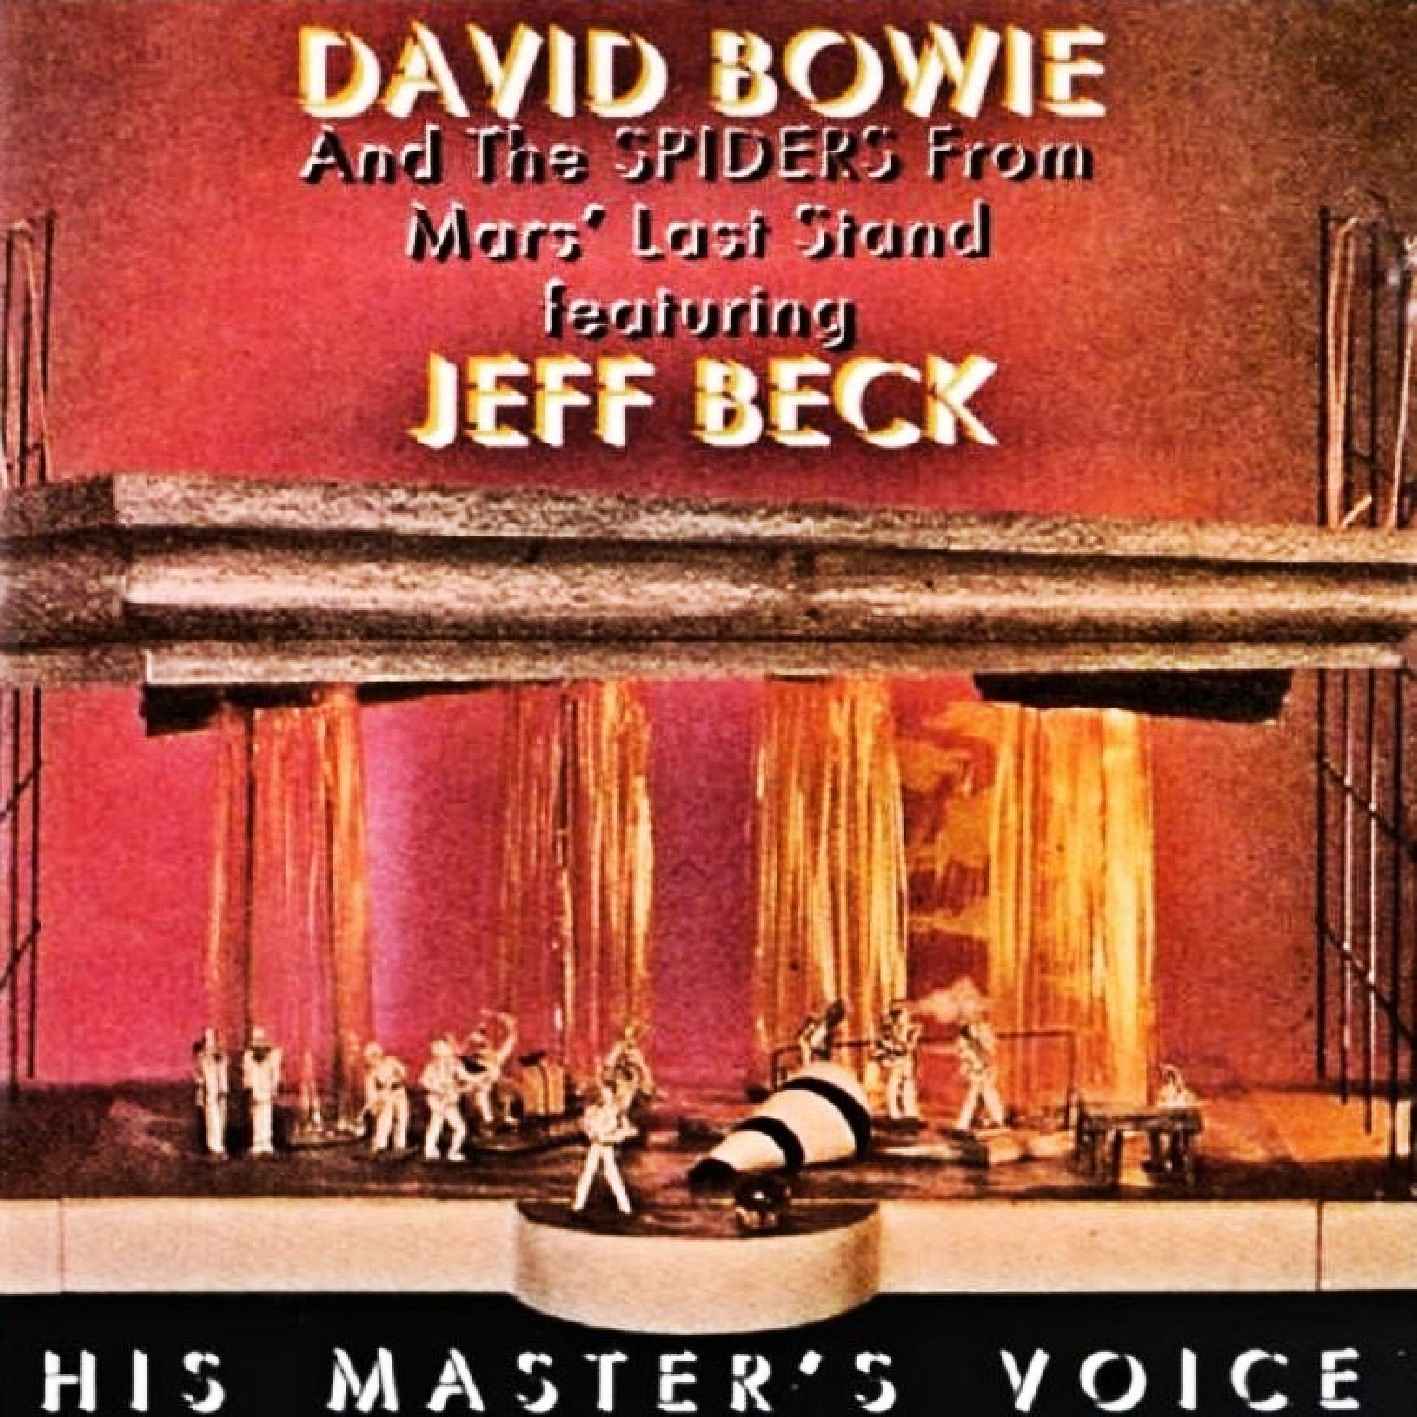 [bowie.his.masters.voice.1973.front.jpg]